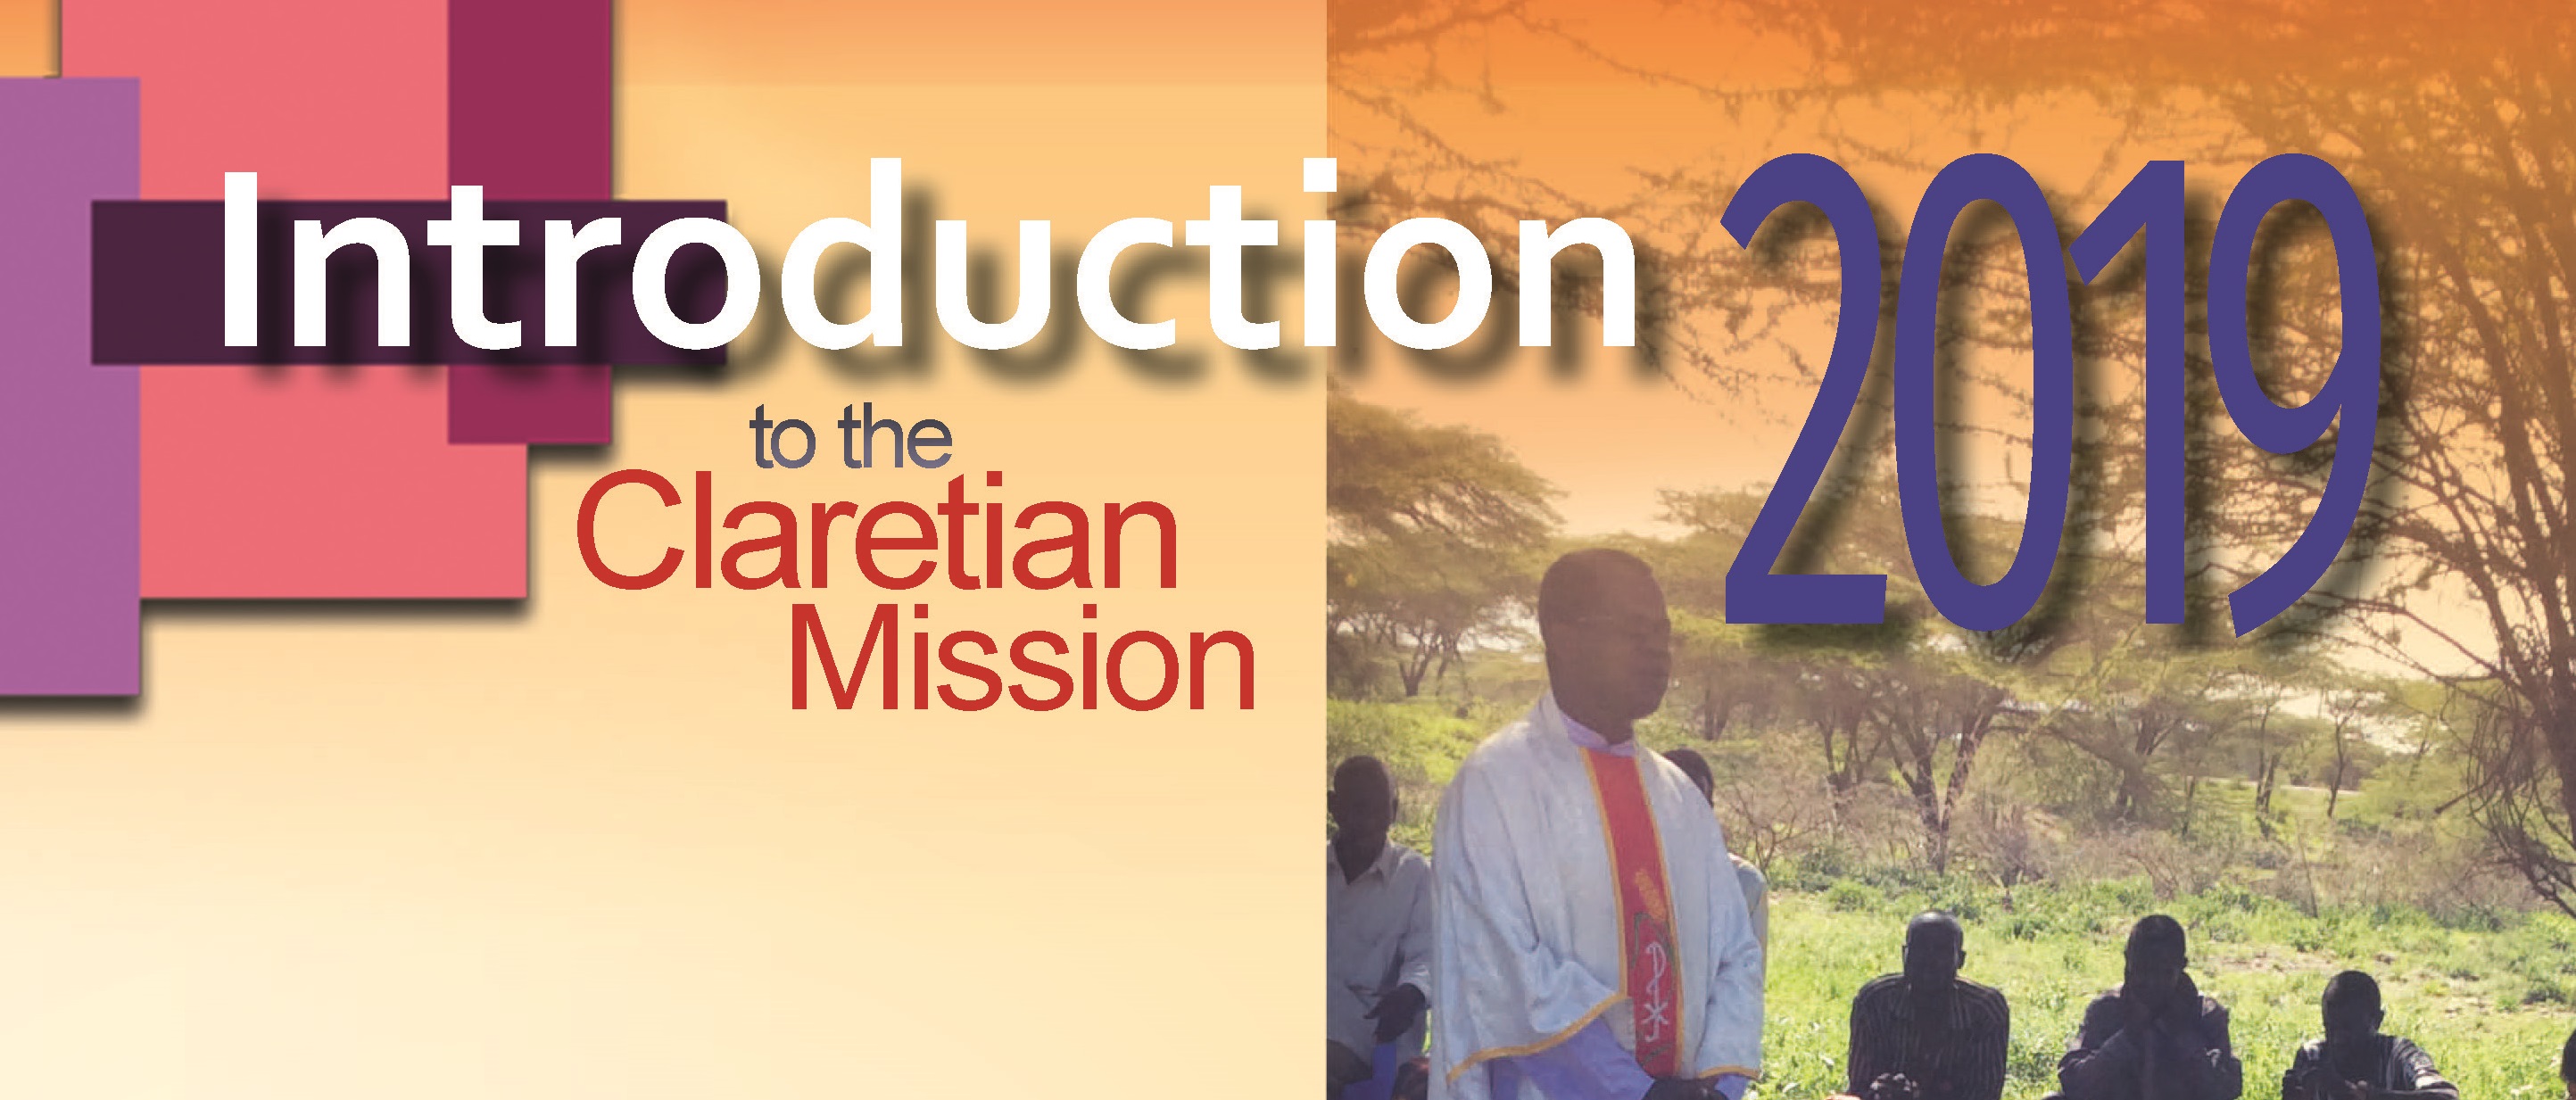 INTRODUCTION TO THE CLARETIAN MISSION 2019